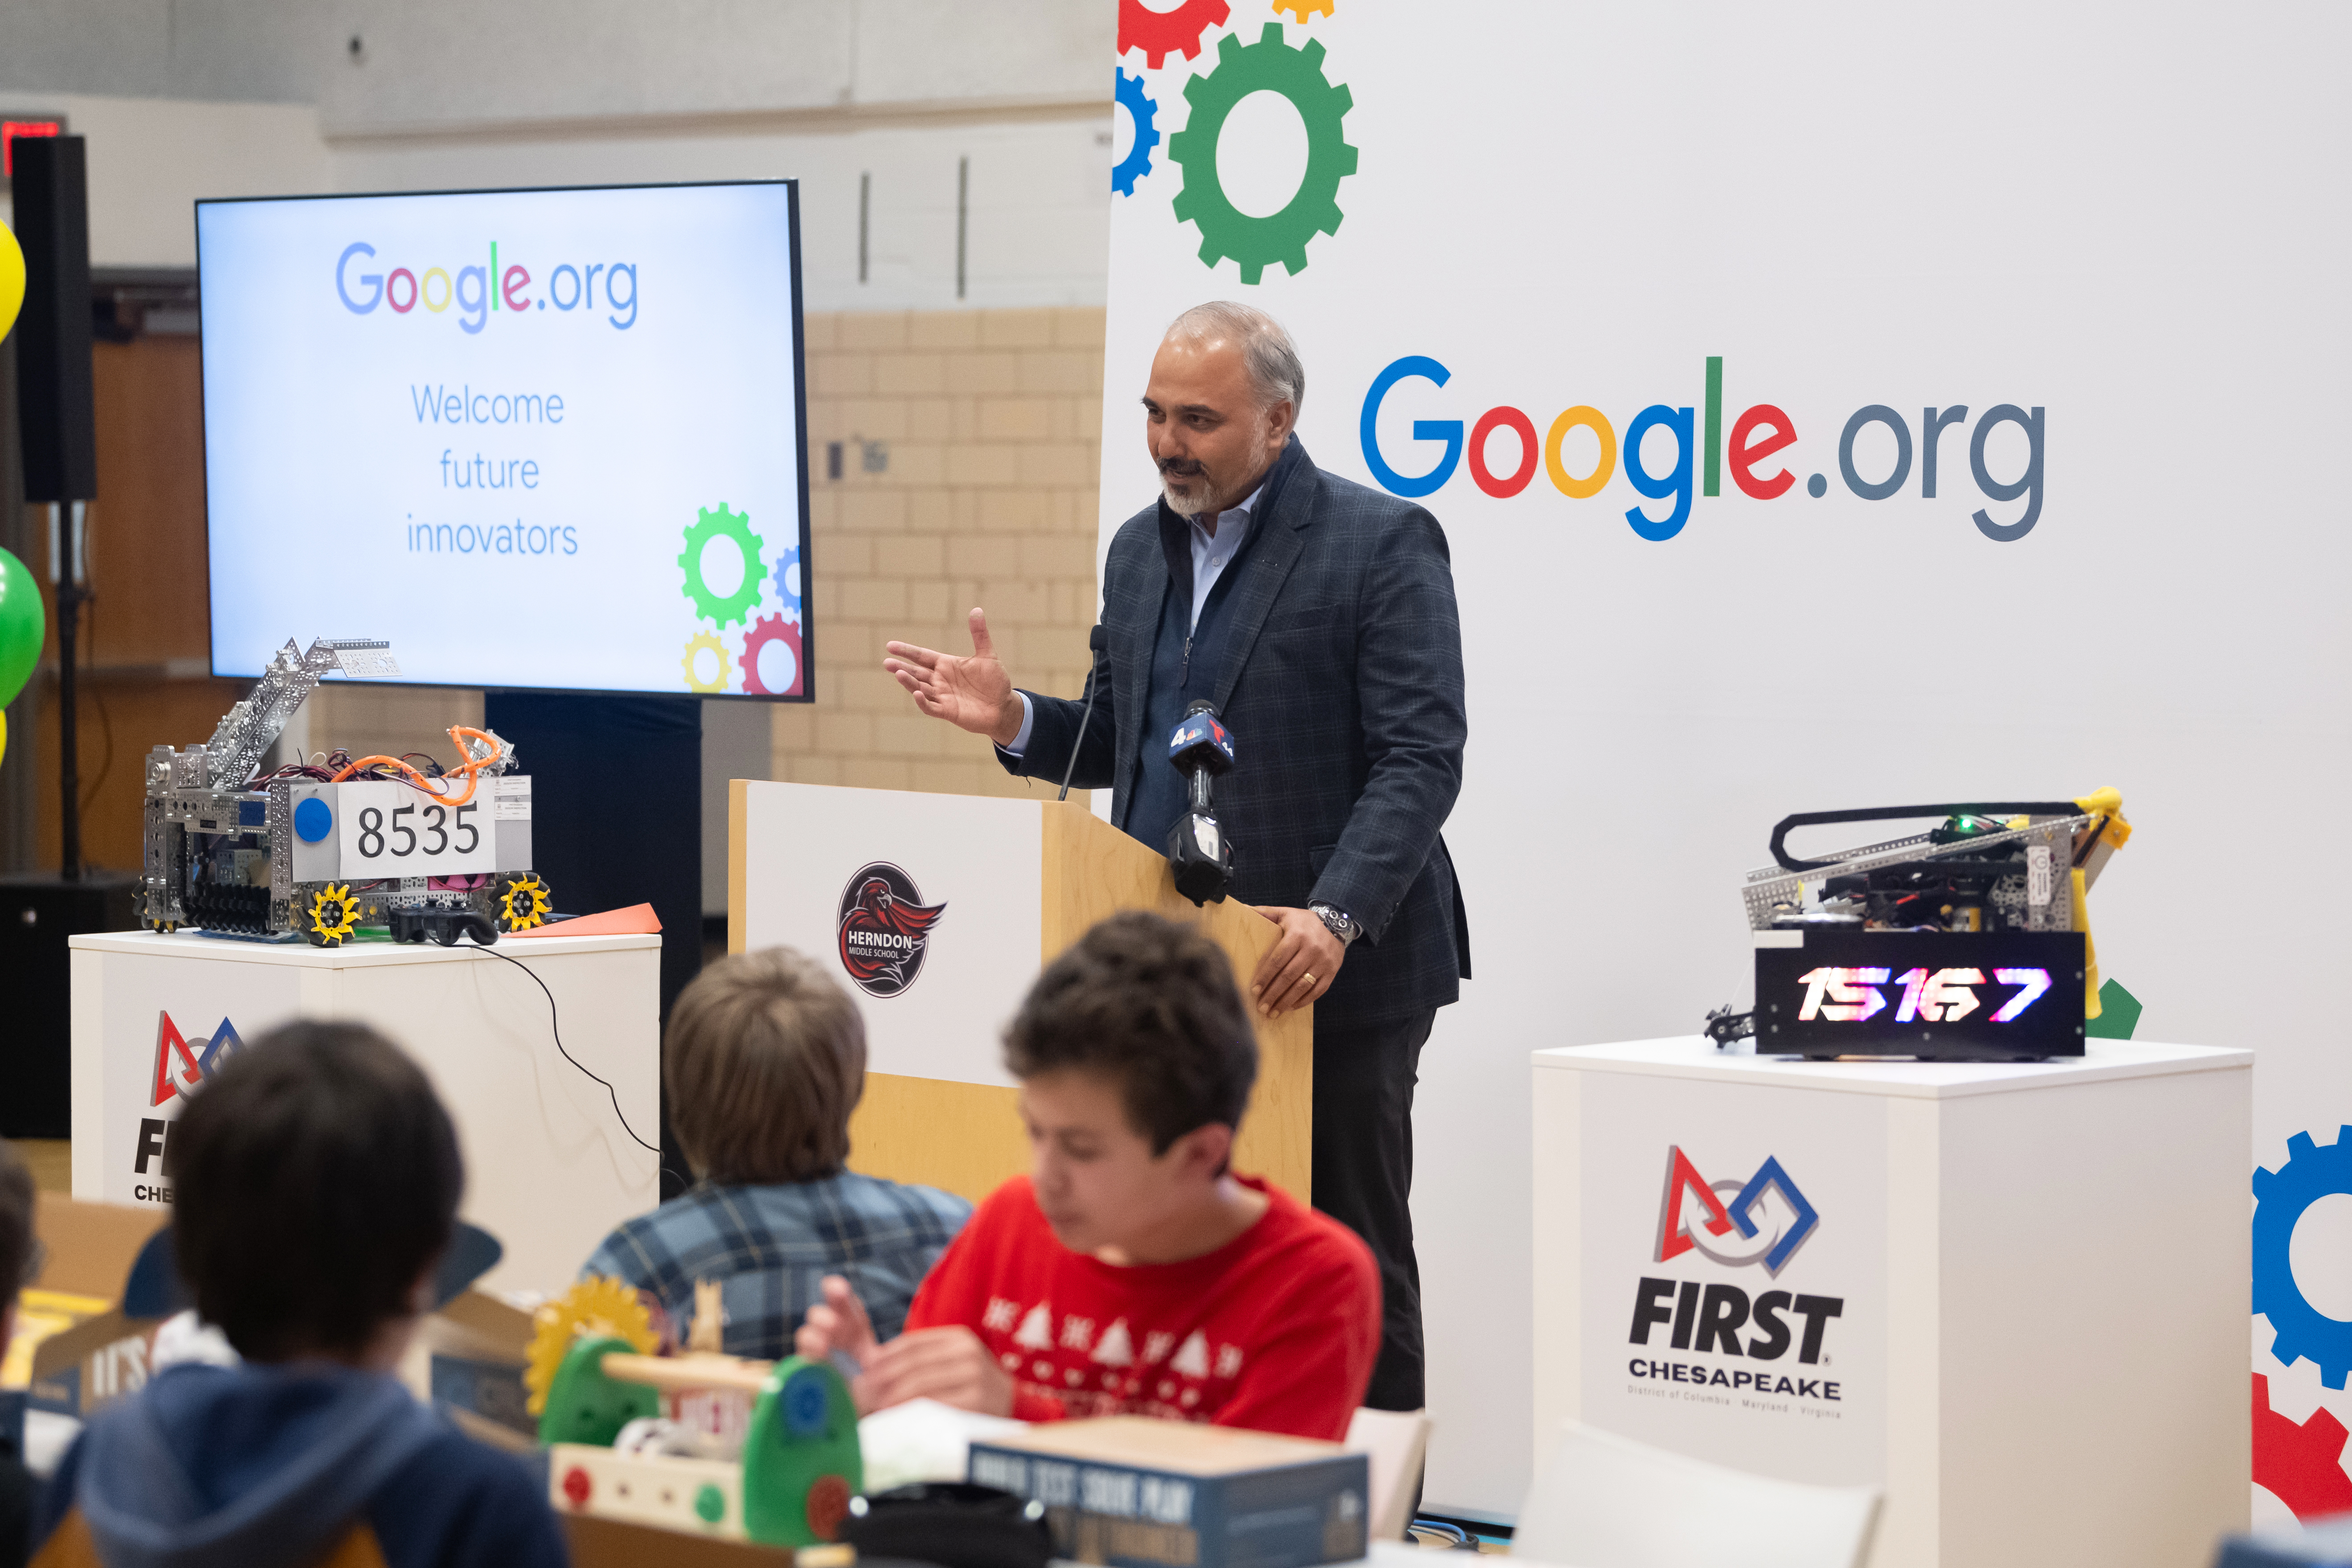 FCPS Chief Information Technology Officer Gautam Sethi spoke at the grant award ceremony, expressing enthusiasm for how robotics clubs will help prepare students for the careers of the future.